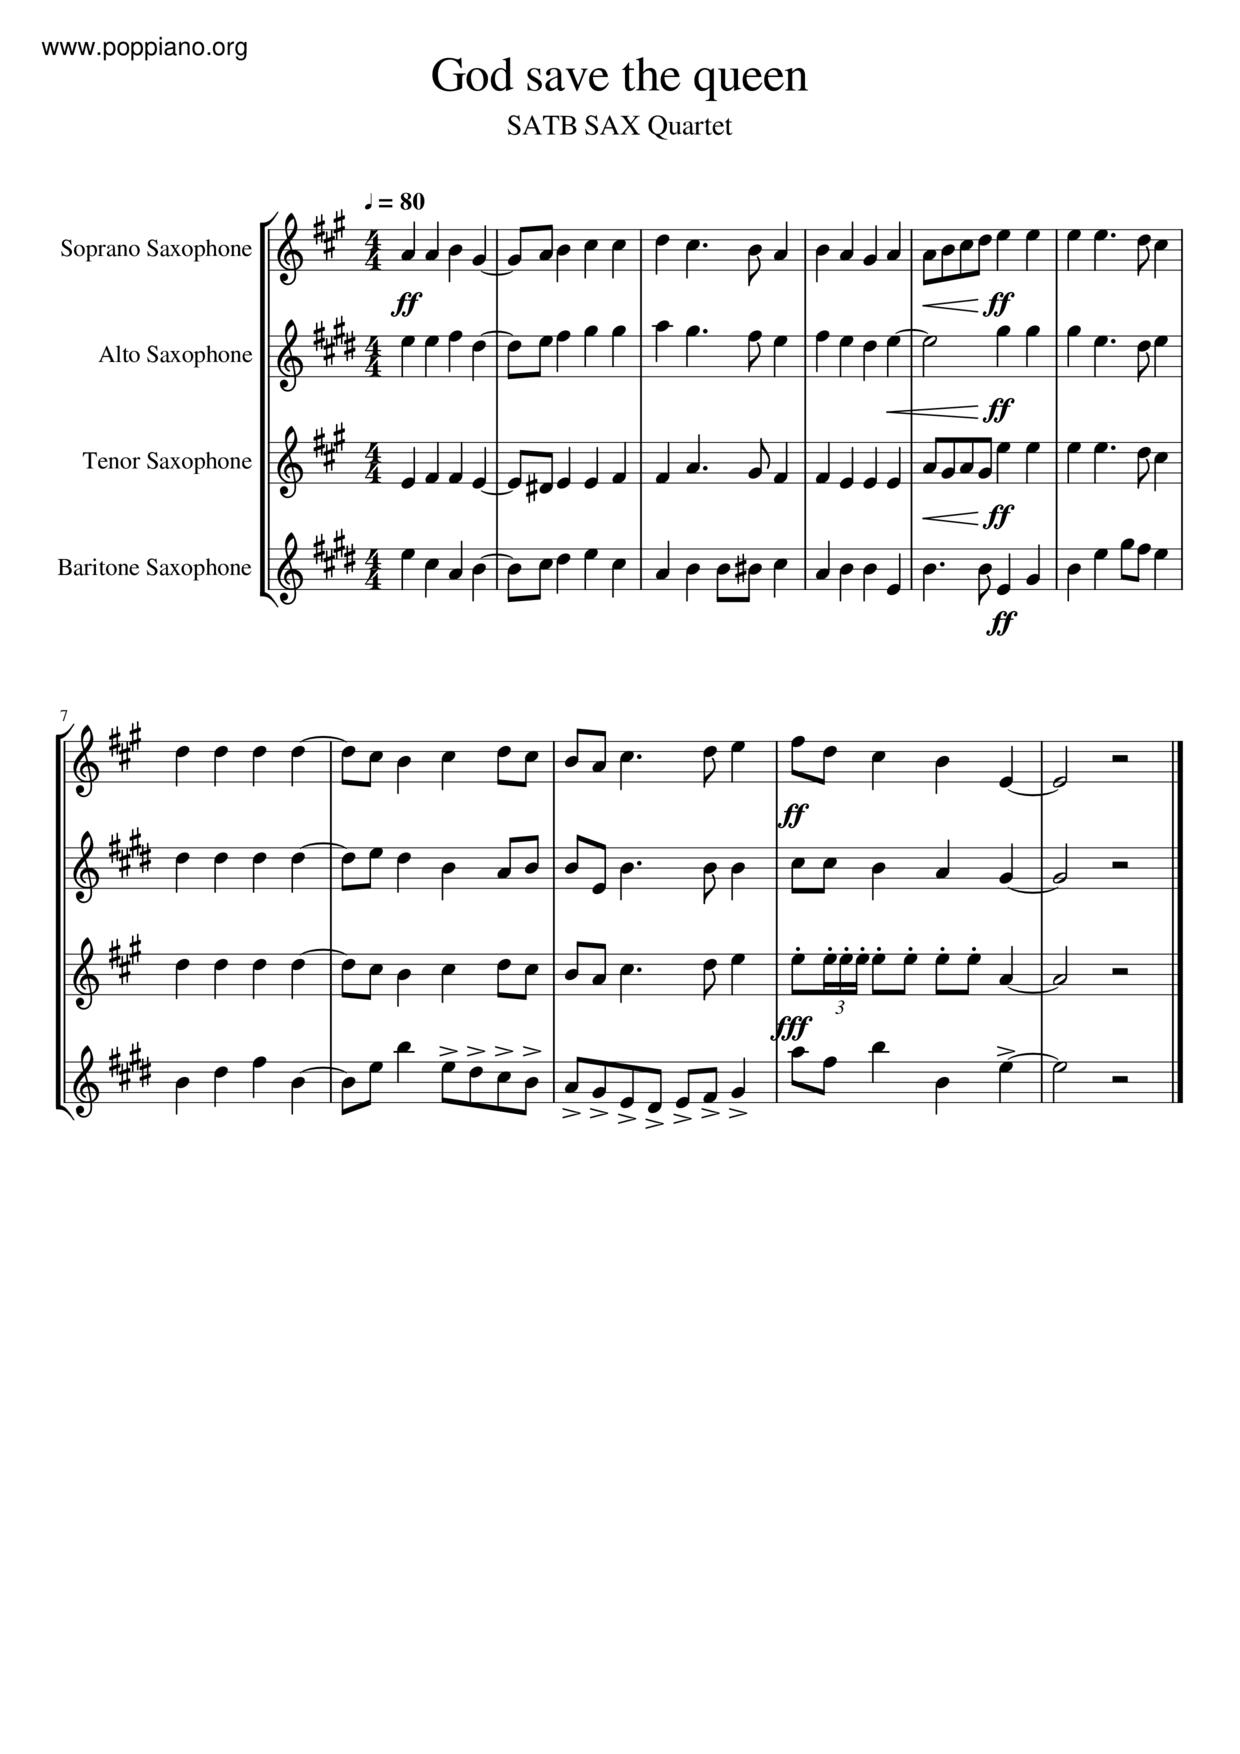 God Save The Queen The Goddess Of Heaven Score